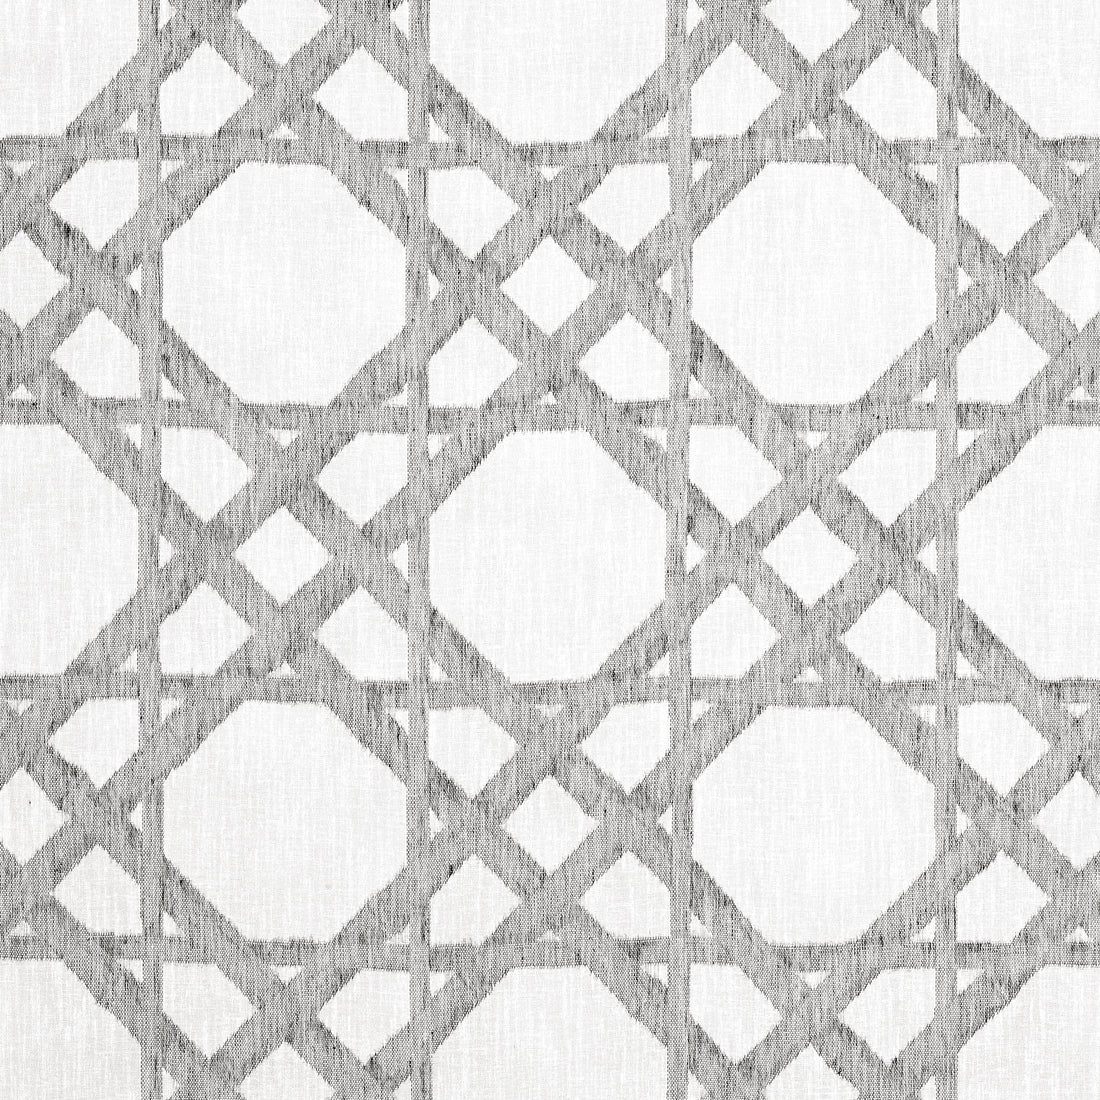 Cyrus Cane Sheer fabric in smoke color - pattern number FWW7135 - by Thibaut in the Atmosphere collection